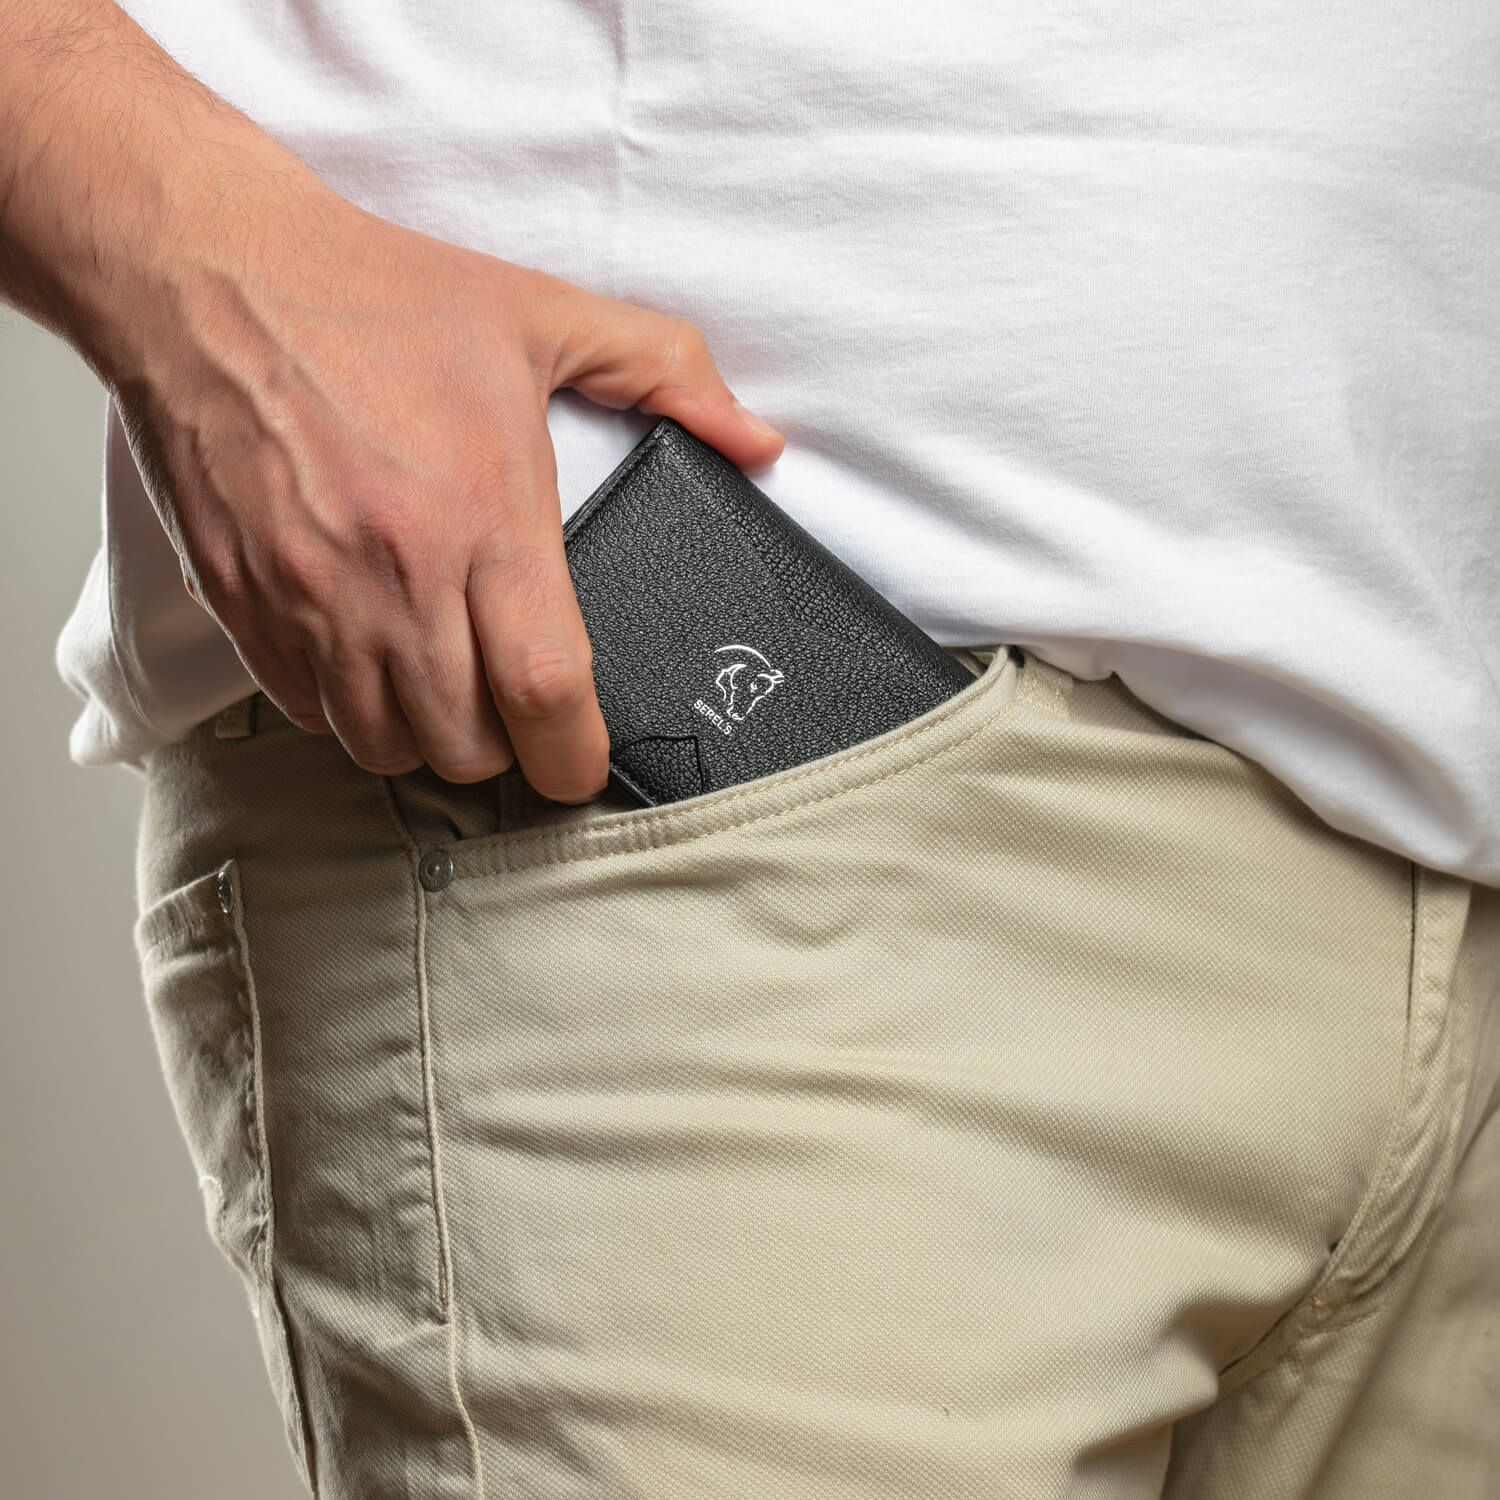 Serel's Gracious Bifold Wallet while the product goes into the front pocket of the trousers